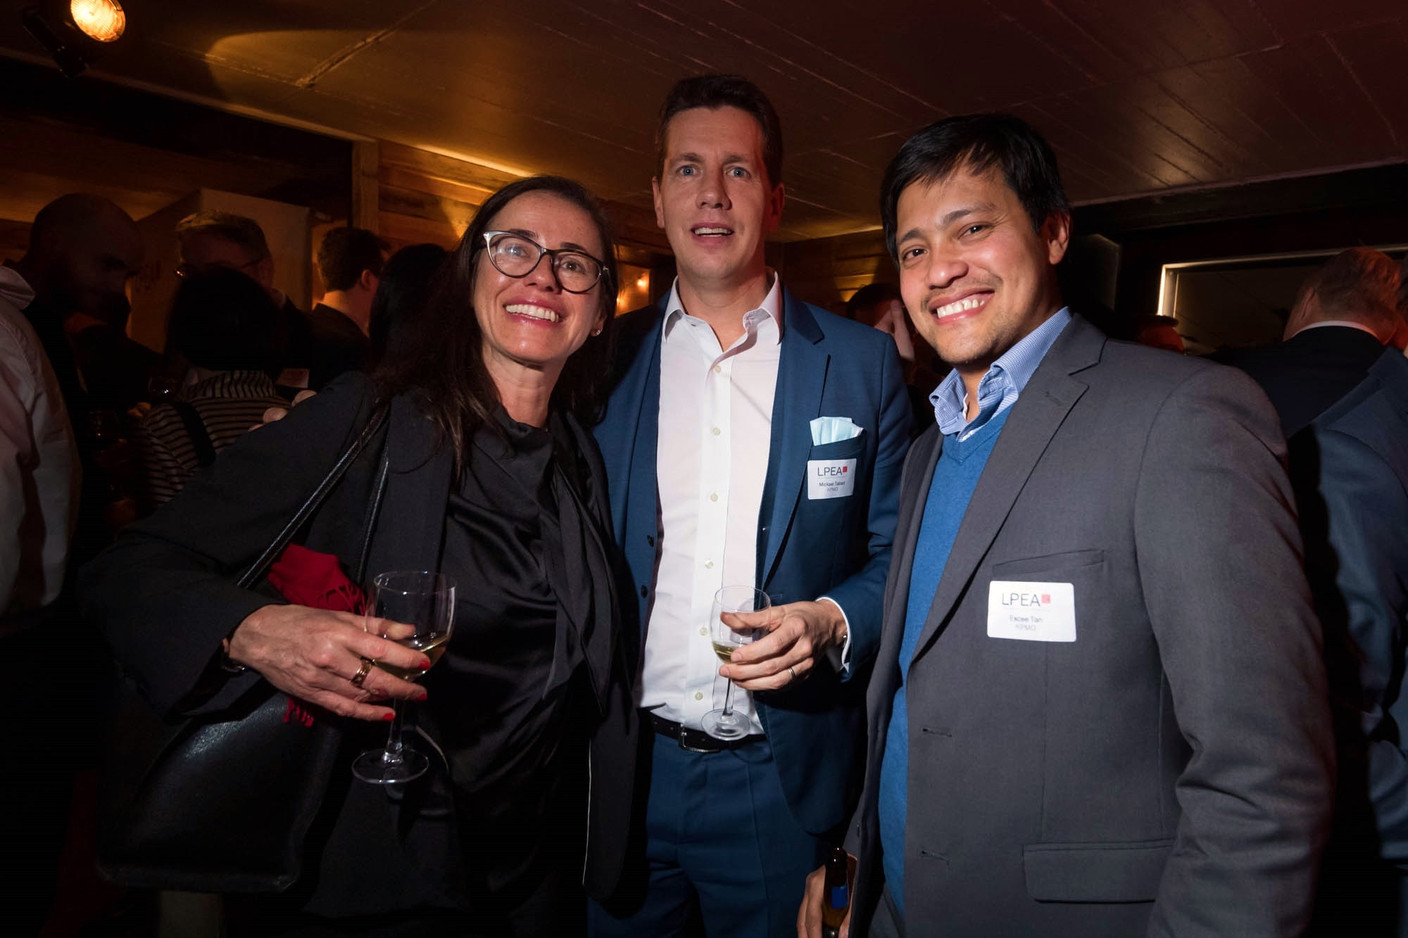 Alessia Lorenti of Edmond de Rothschild Asset Management (which sponsored the wine tasting), and Mickael Tabart and Excee Tan of KPMG are seen during the LPEA’s 2022 new year reception, 24 February 2022. Photo: LPEA/Nader Ghavami